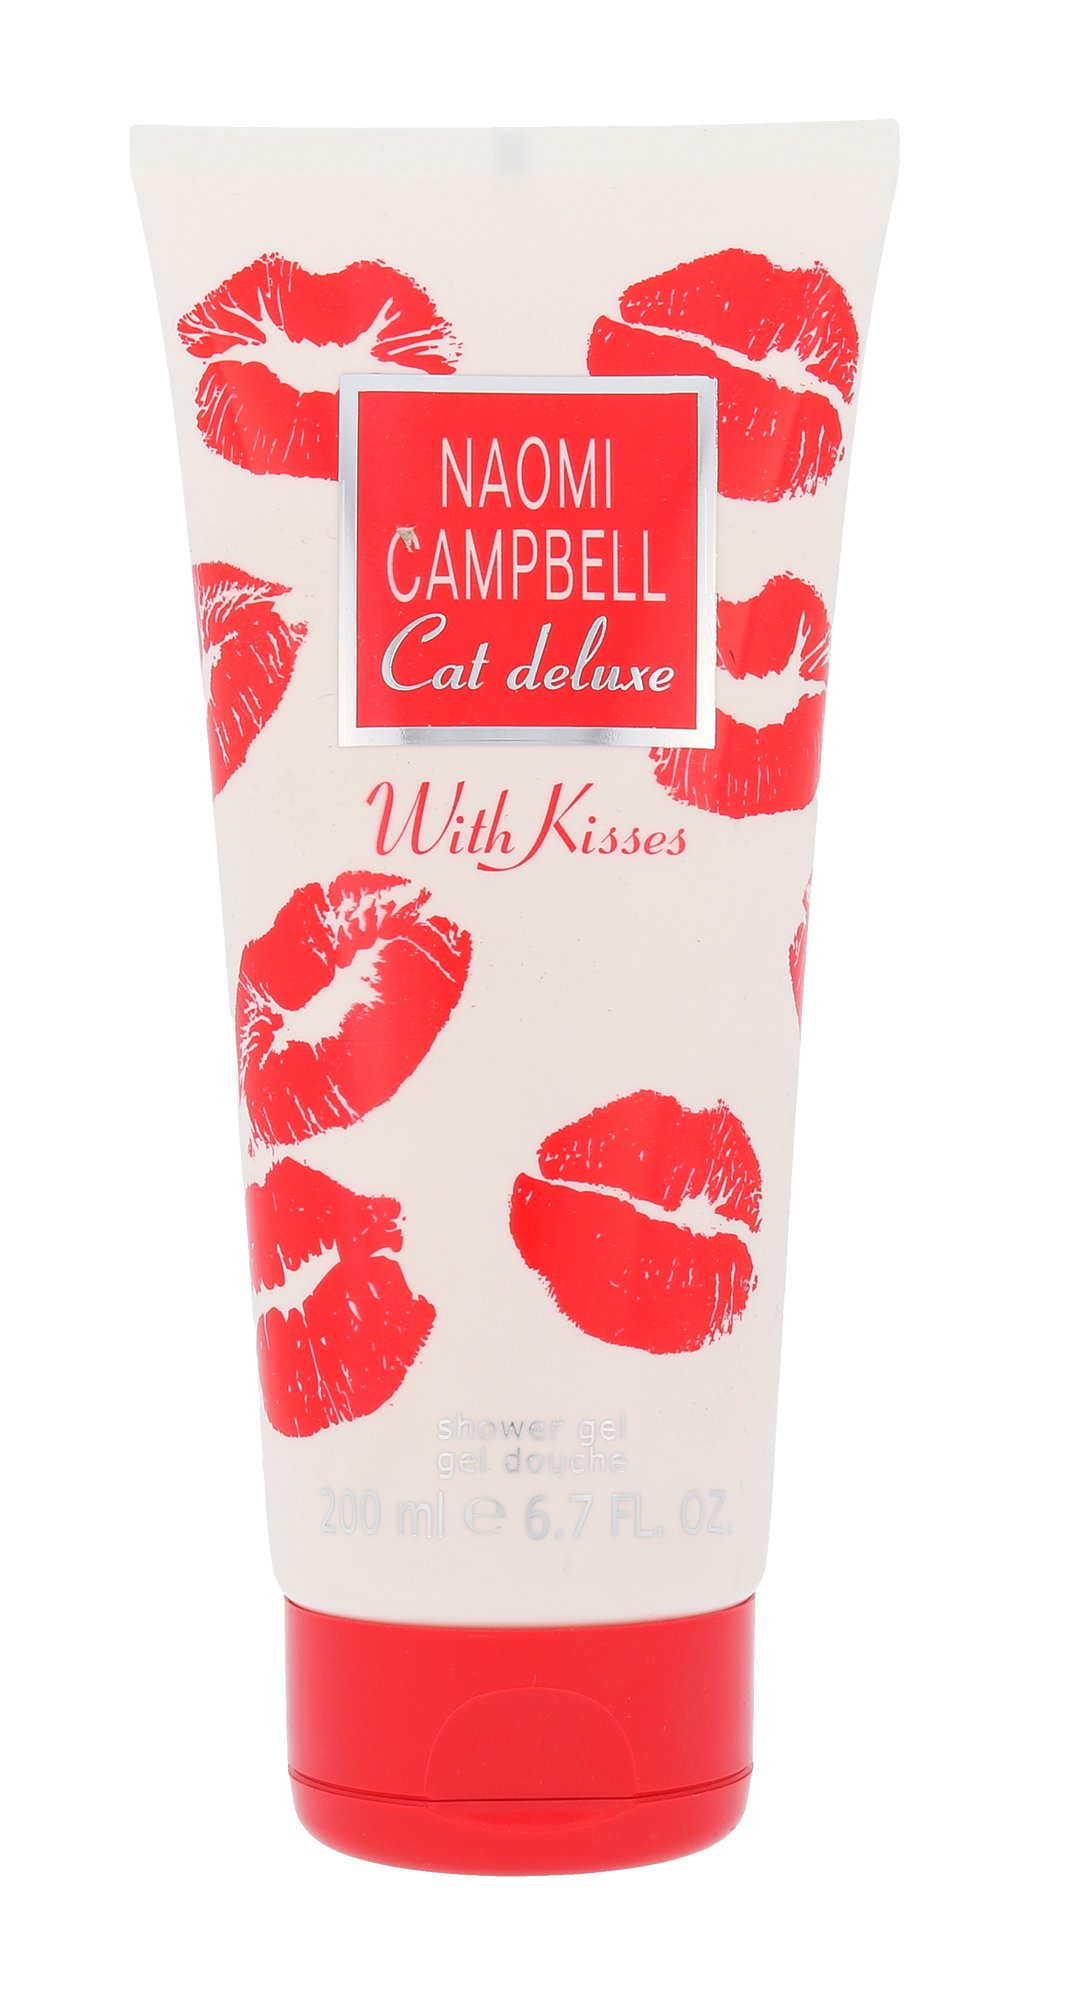 Naomi Campbell Cat Deluxe With Kisses, Sprchovací gél 200ml